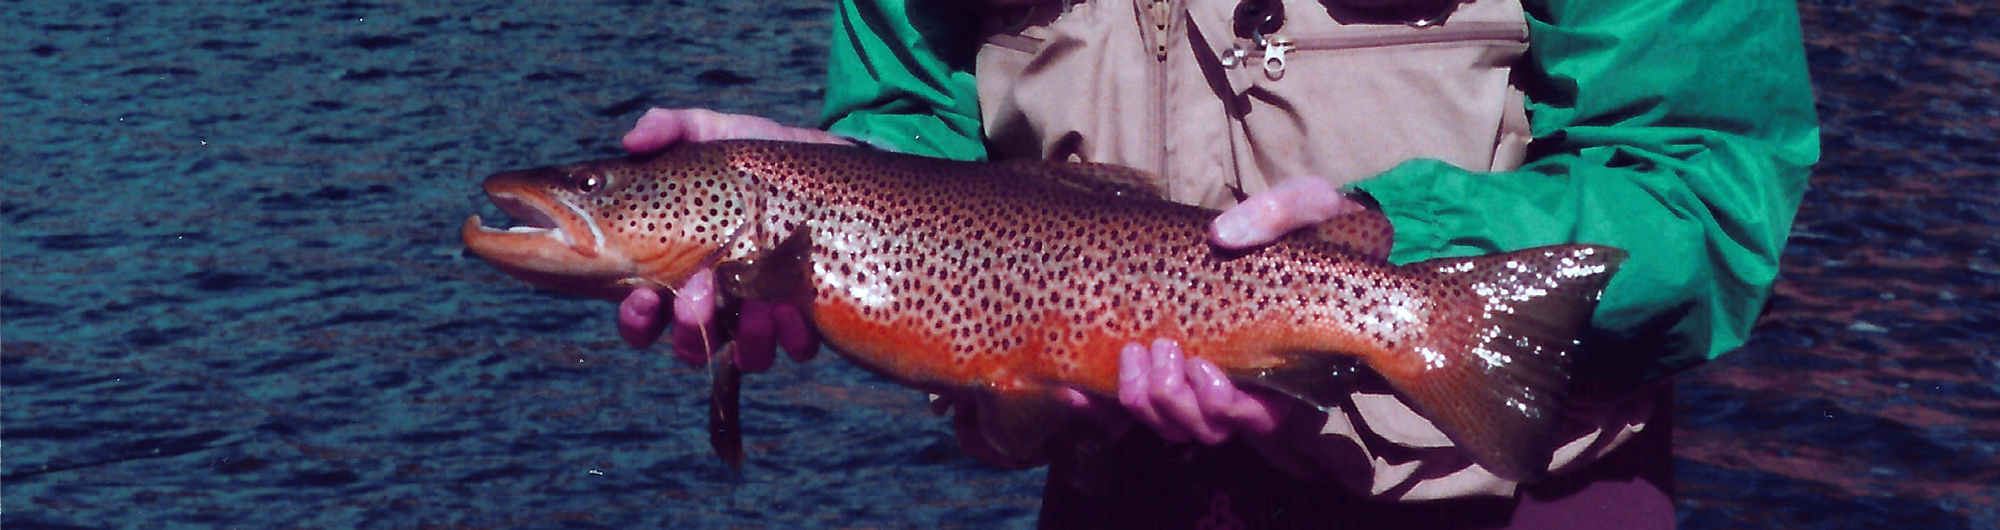 Brown Trout - Madison River 1992